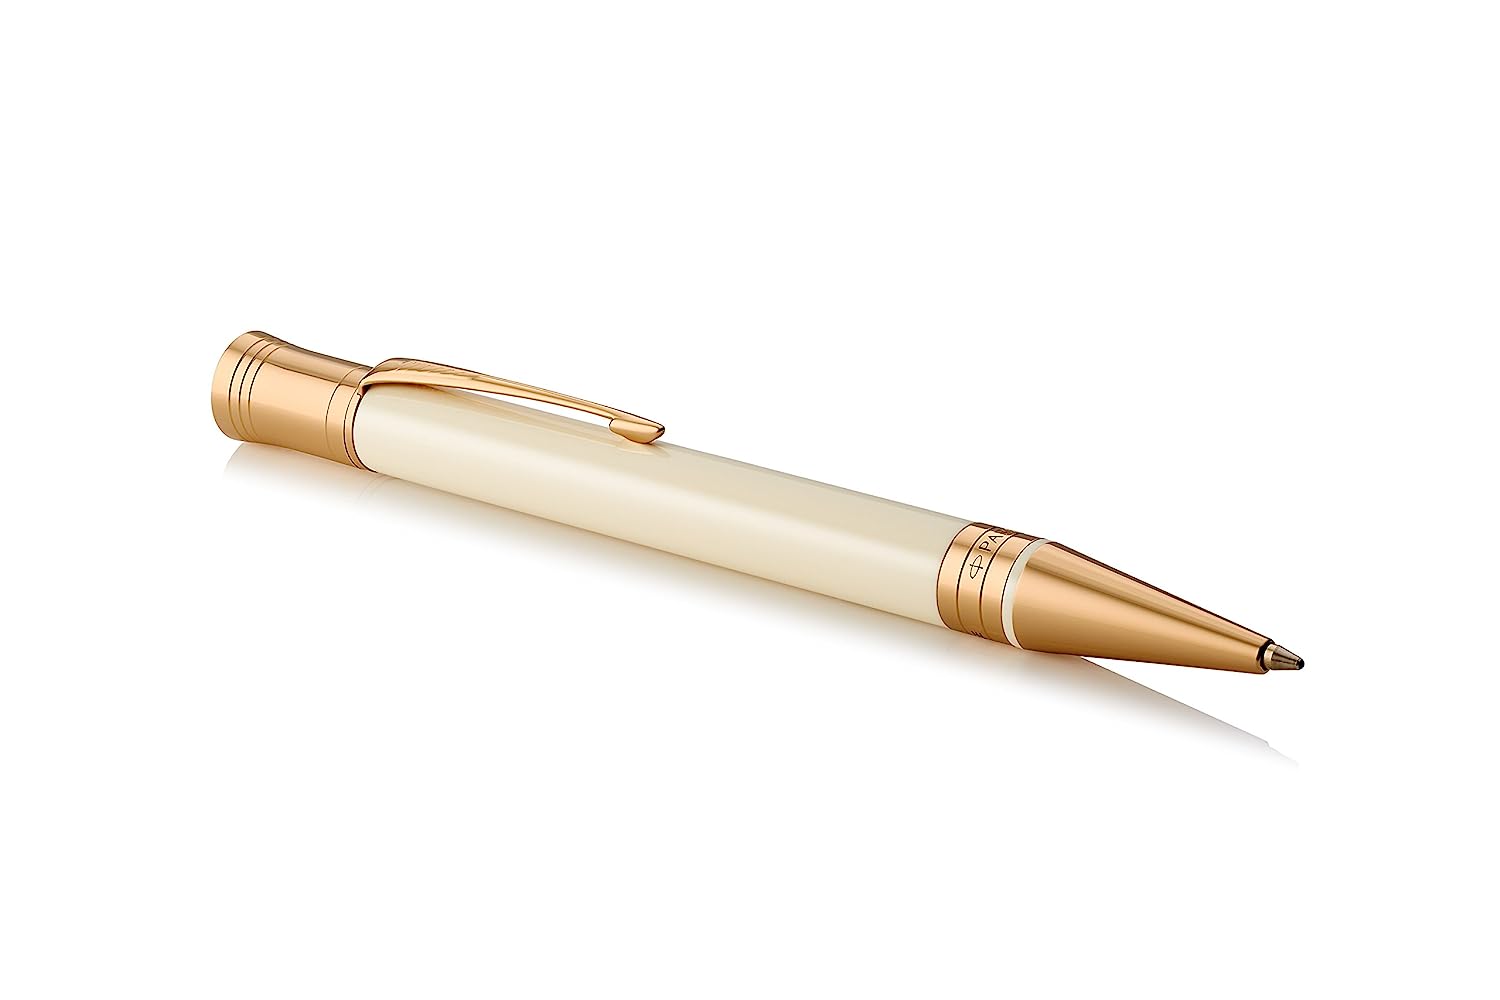 Parker Duofold Classic Ivory with Gold Trim Ballpoint Pen